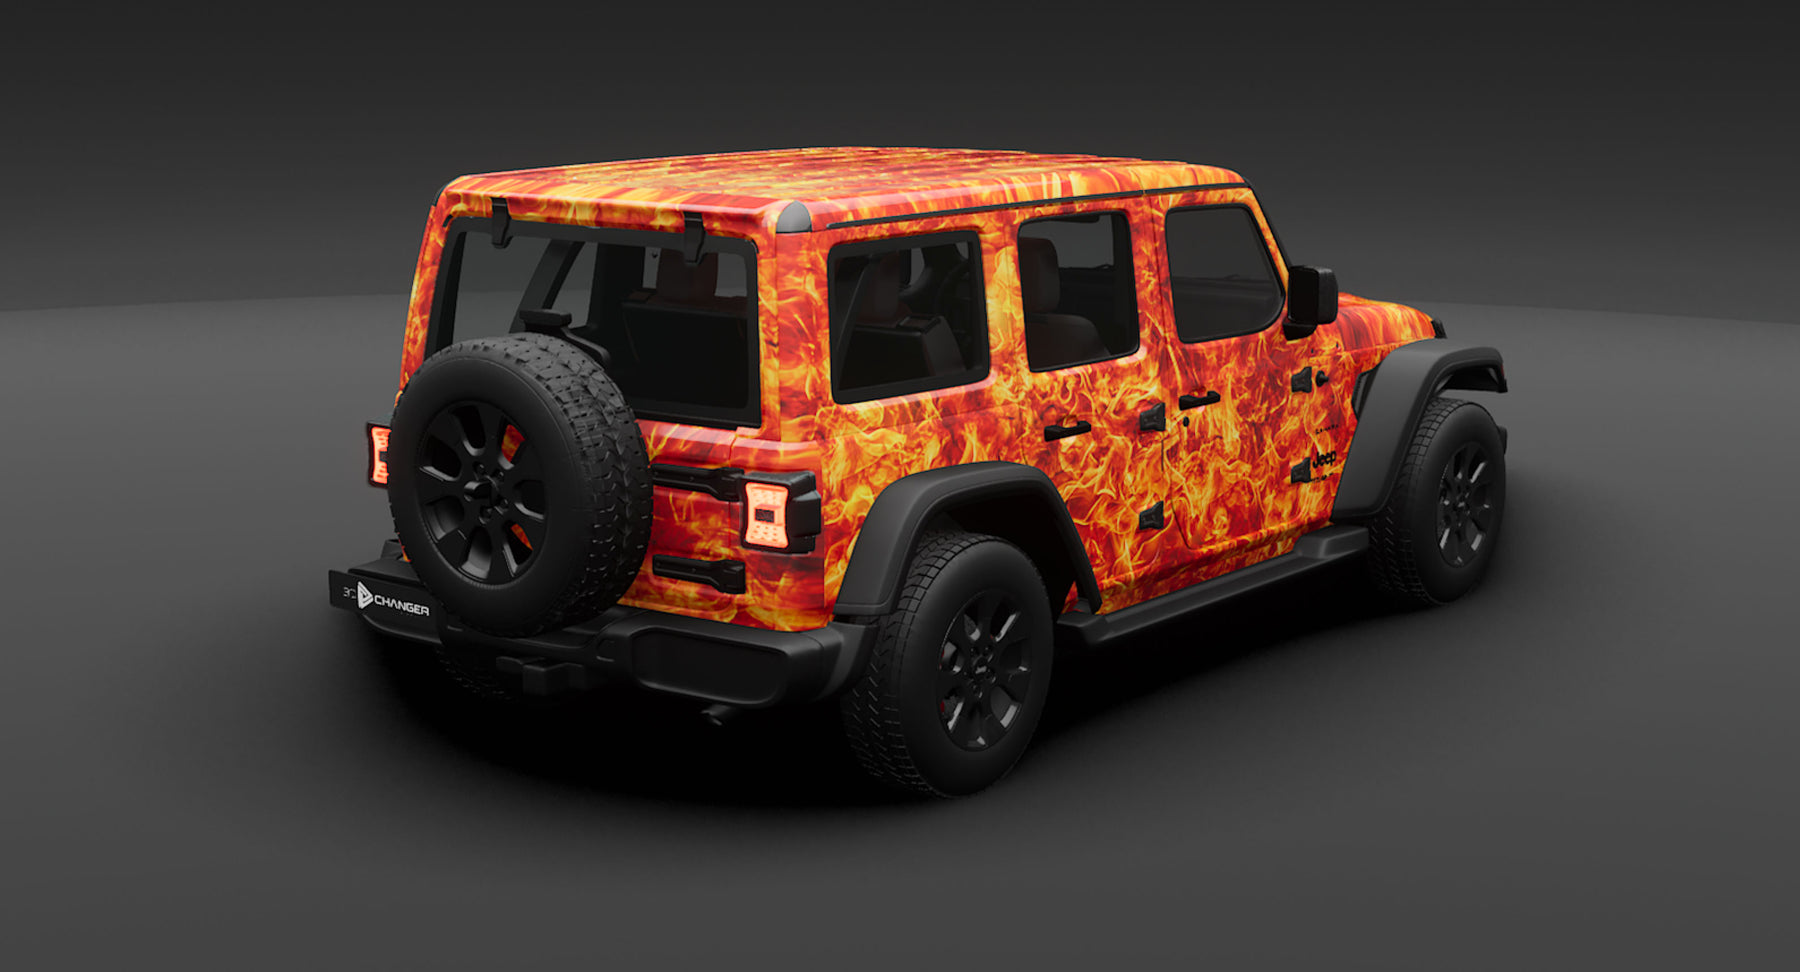 Digital Red And Black Camo vinyl Wrap air release MATTE Finish 12x12 Or  Rolls